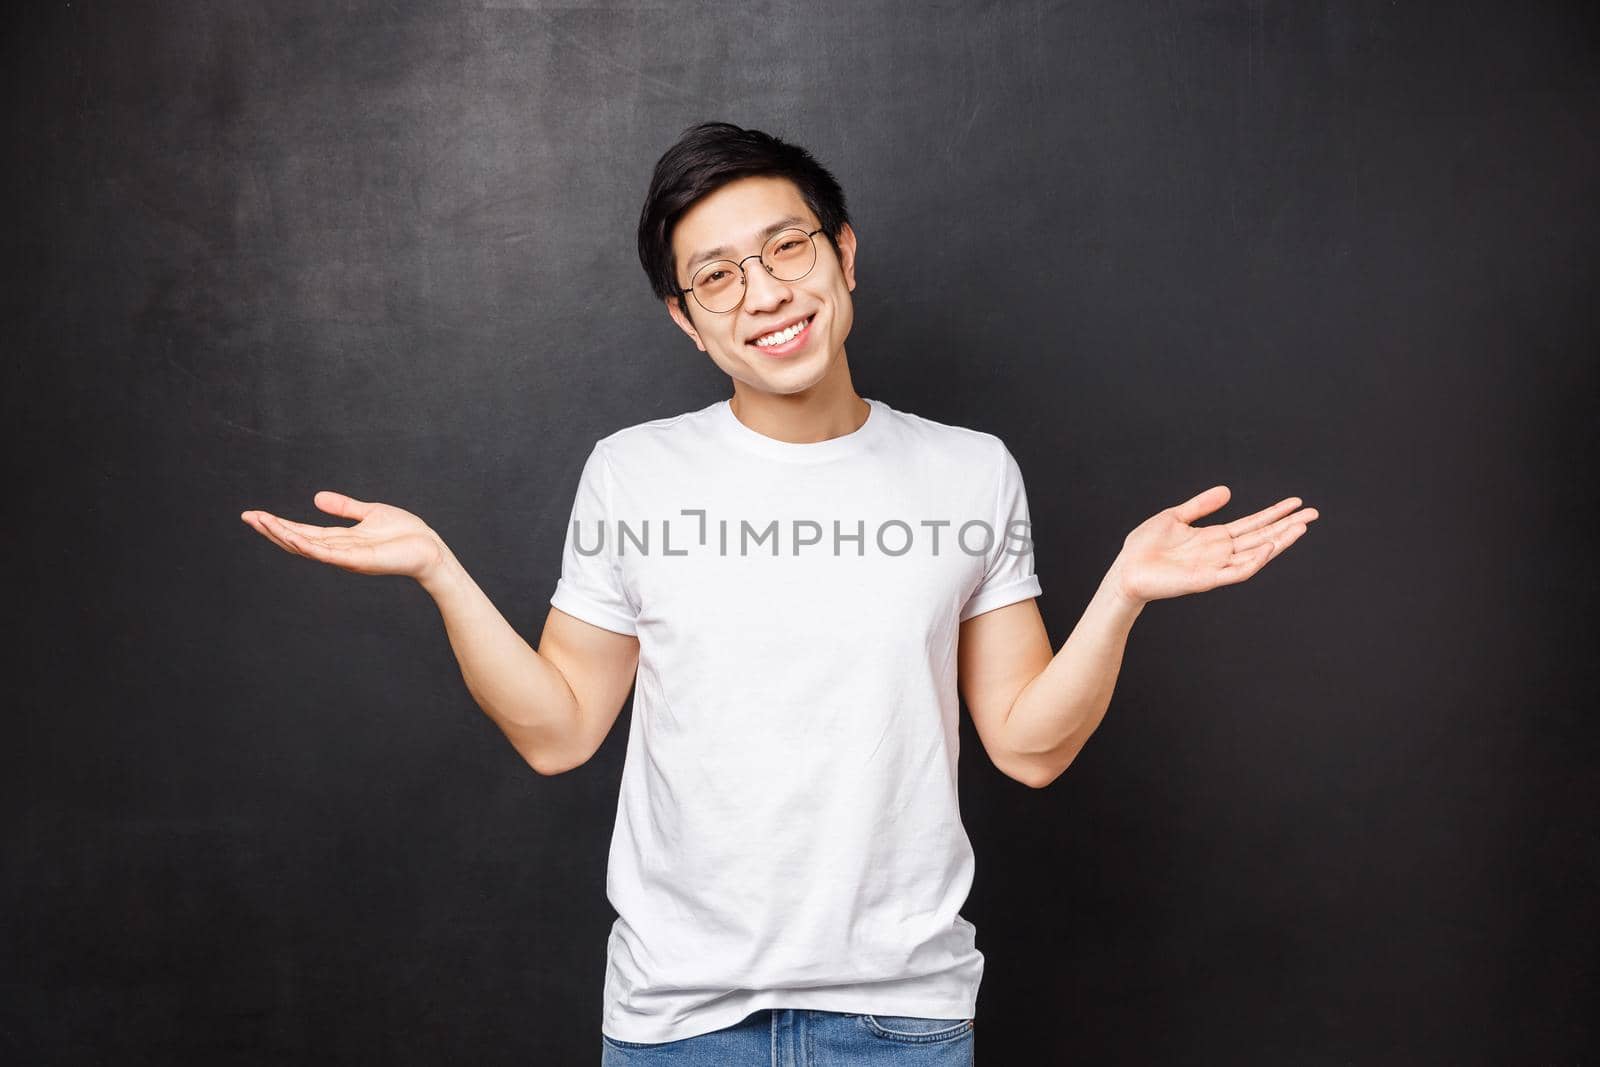 No big dea. Handsome carefree and unbothered asian guy shrugging and spread hands sideways clueless, have no idea, dont know anything and not care at all, black background, smiling.